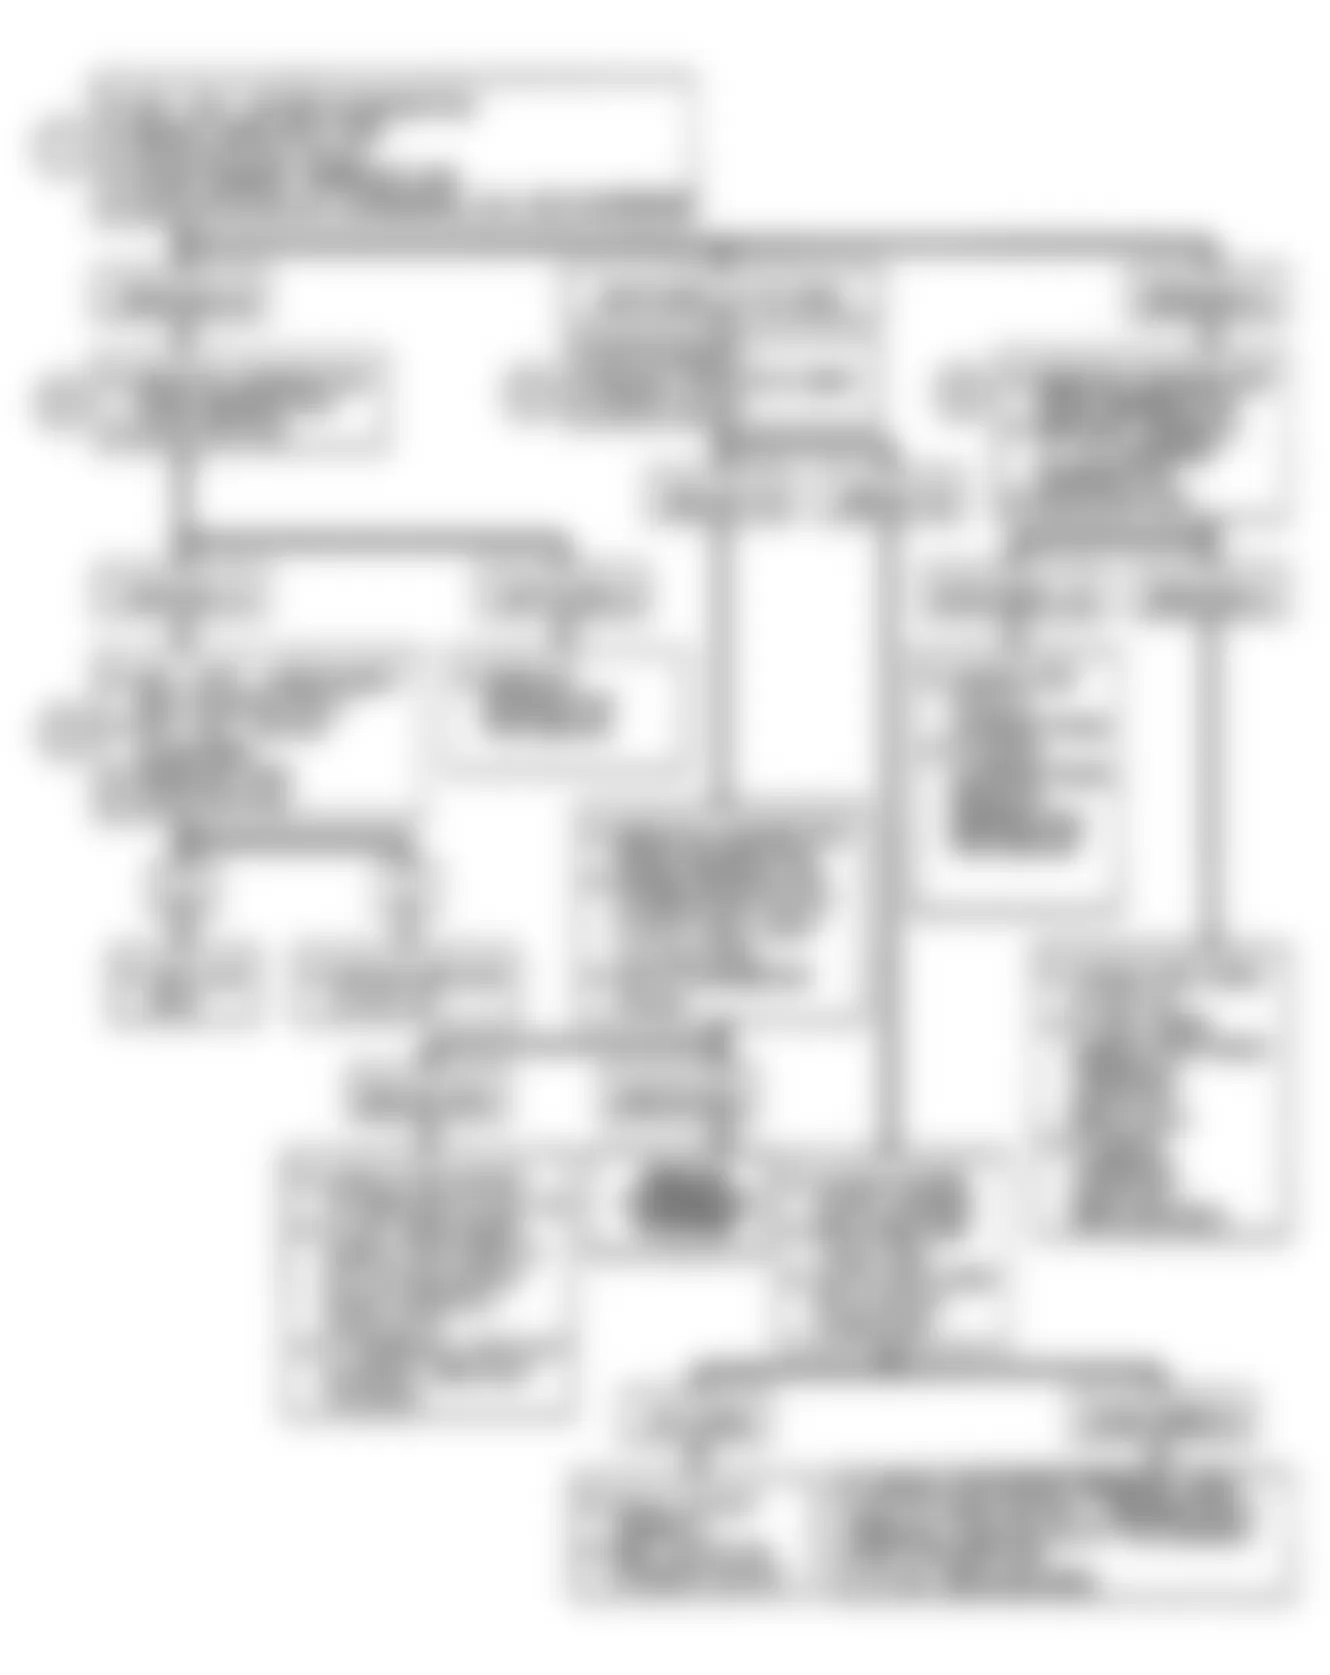 Buick Reatta 1990 - Component Locations -  Code B410: Flow Chart Charging System Circuit Fault